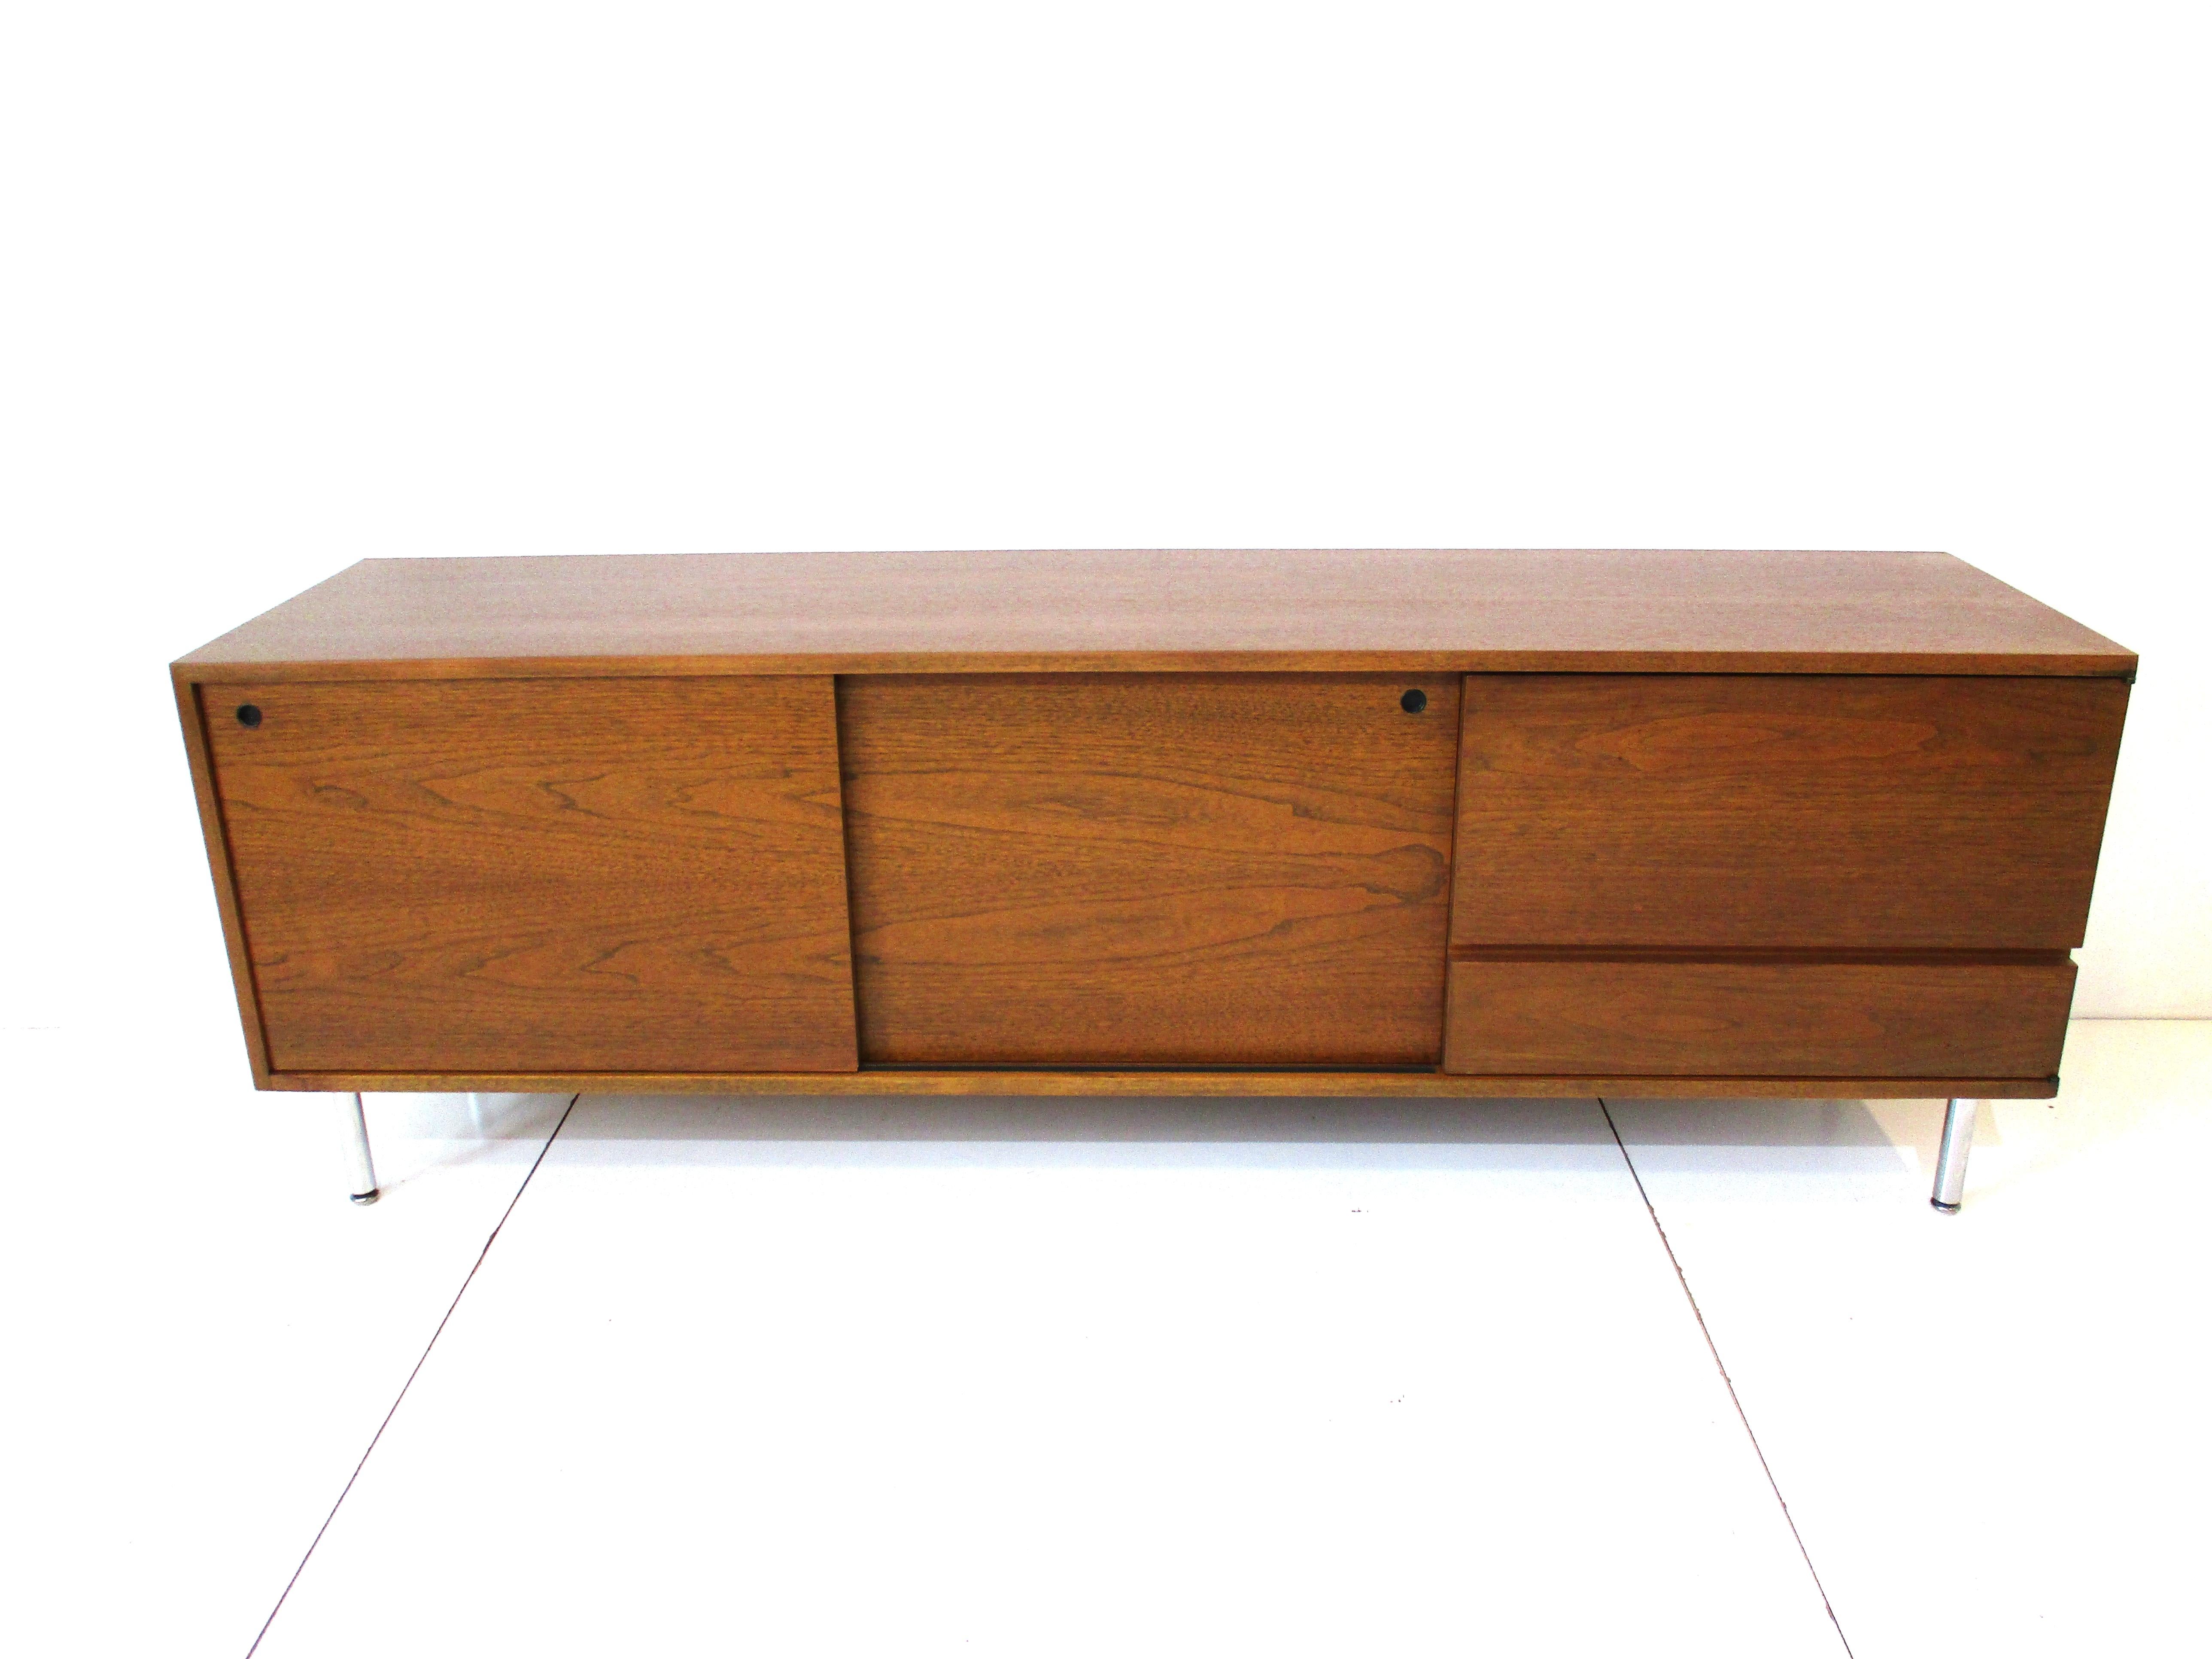 A mid century walnut credenza and two sliding doors having finger pulls in stain black with adjustable shelves inside. The one end has a door with cut in lower handle revealing a smaller drawer inside and a small adjustable shelve with lower